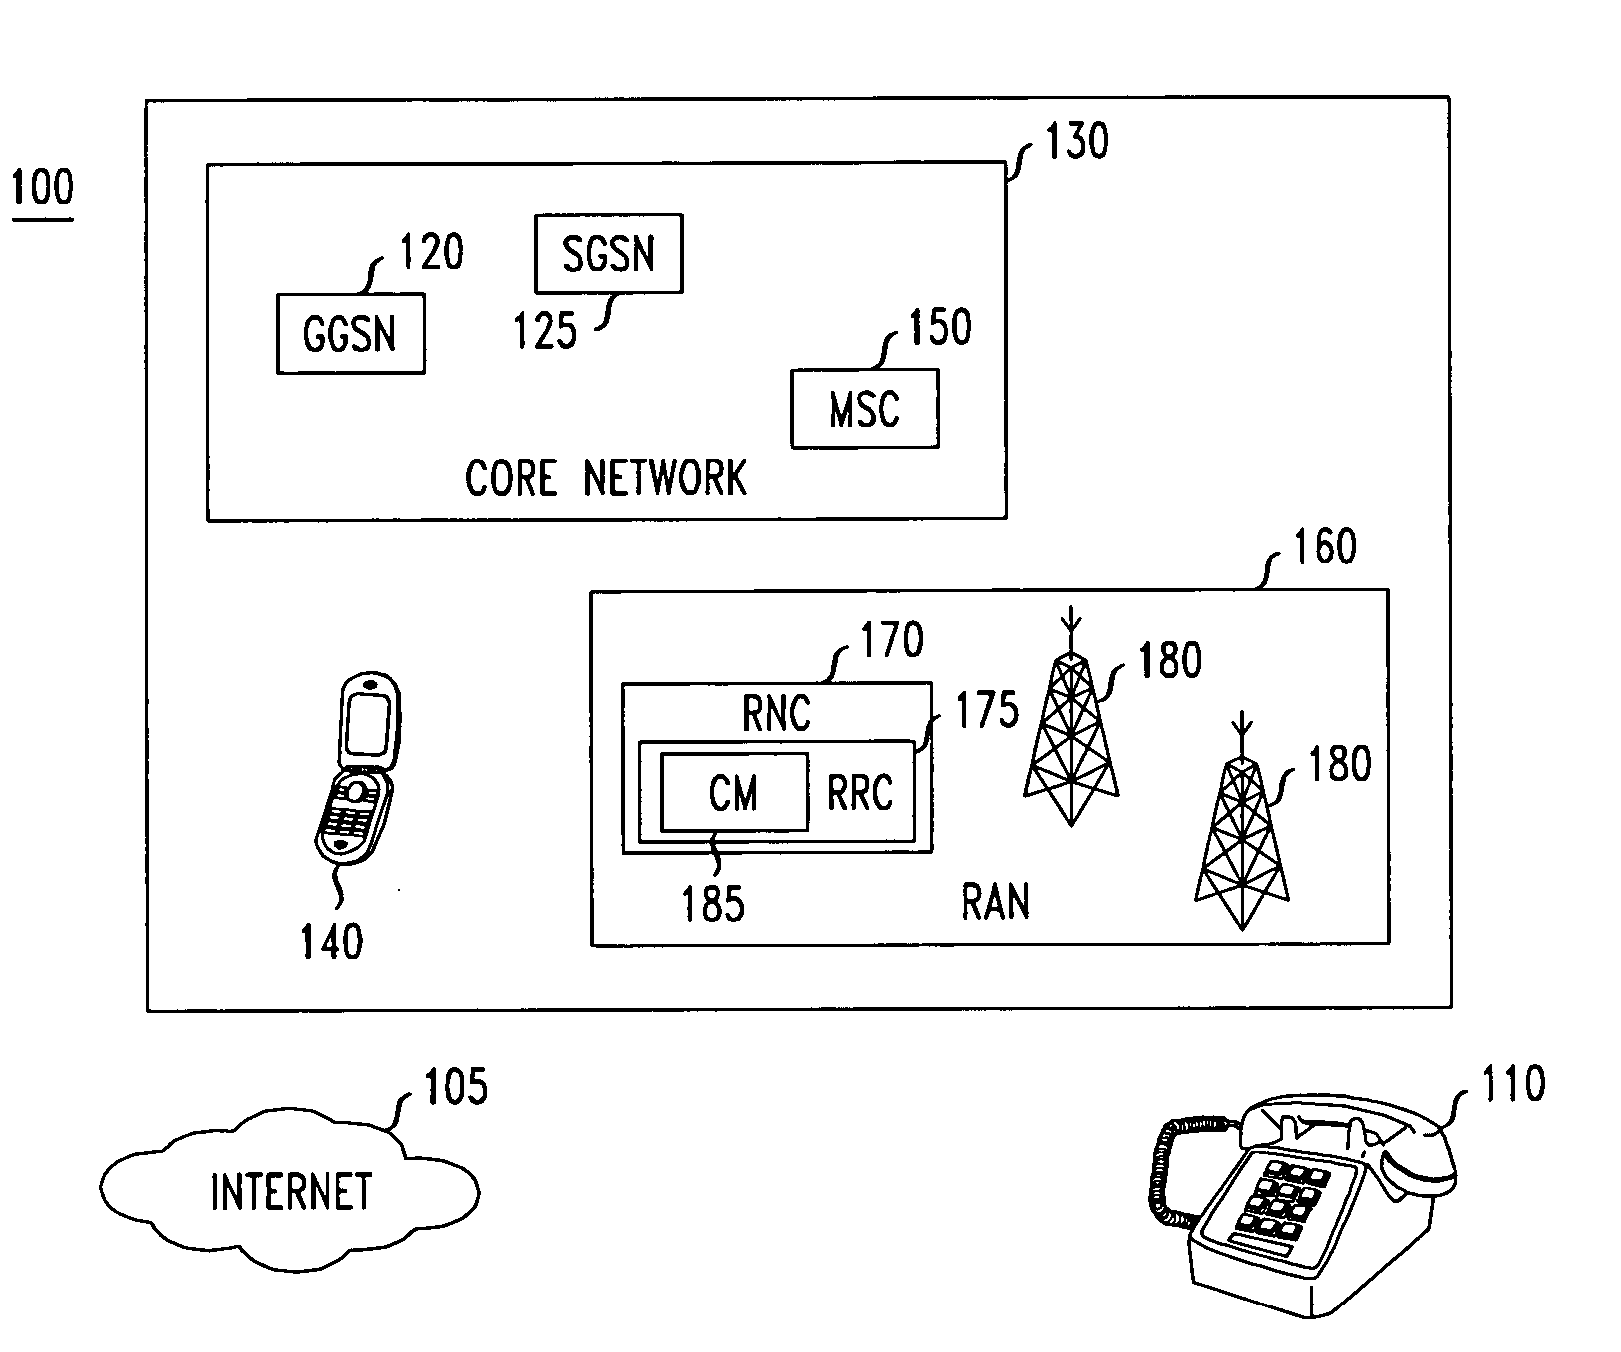 Wireless communications network incorporating voice over IP using shared supplemental spreading codes